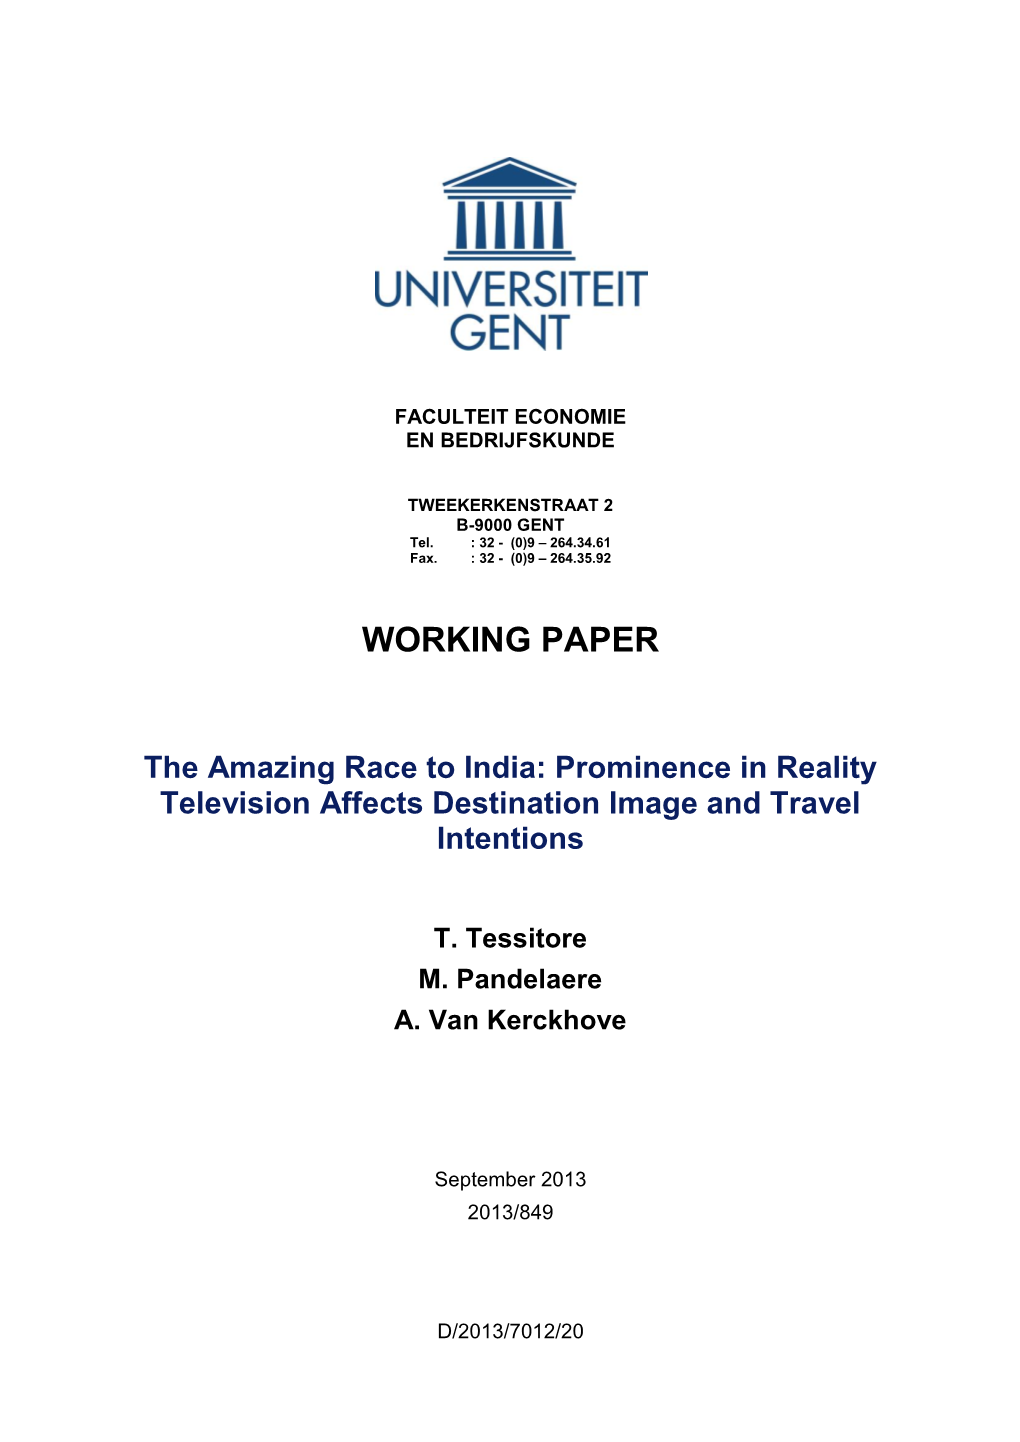 WORKING PAPER the Amazing Race to India